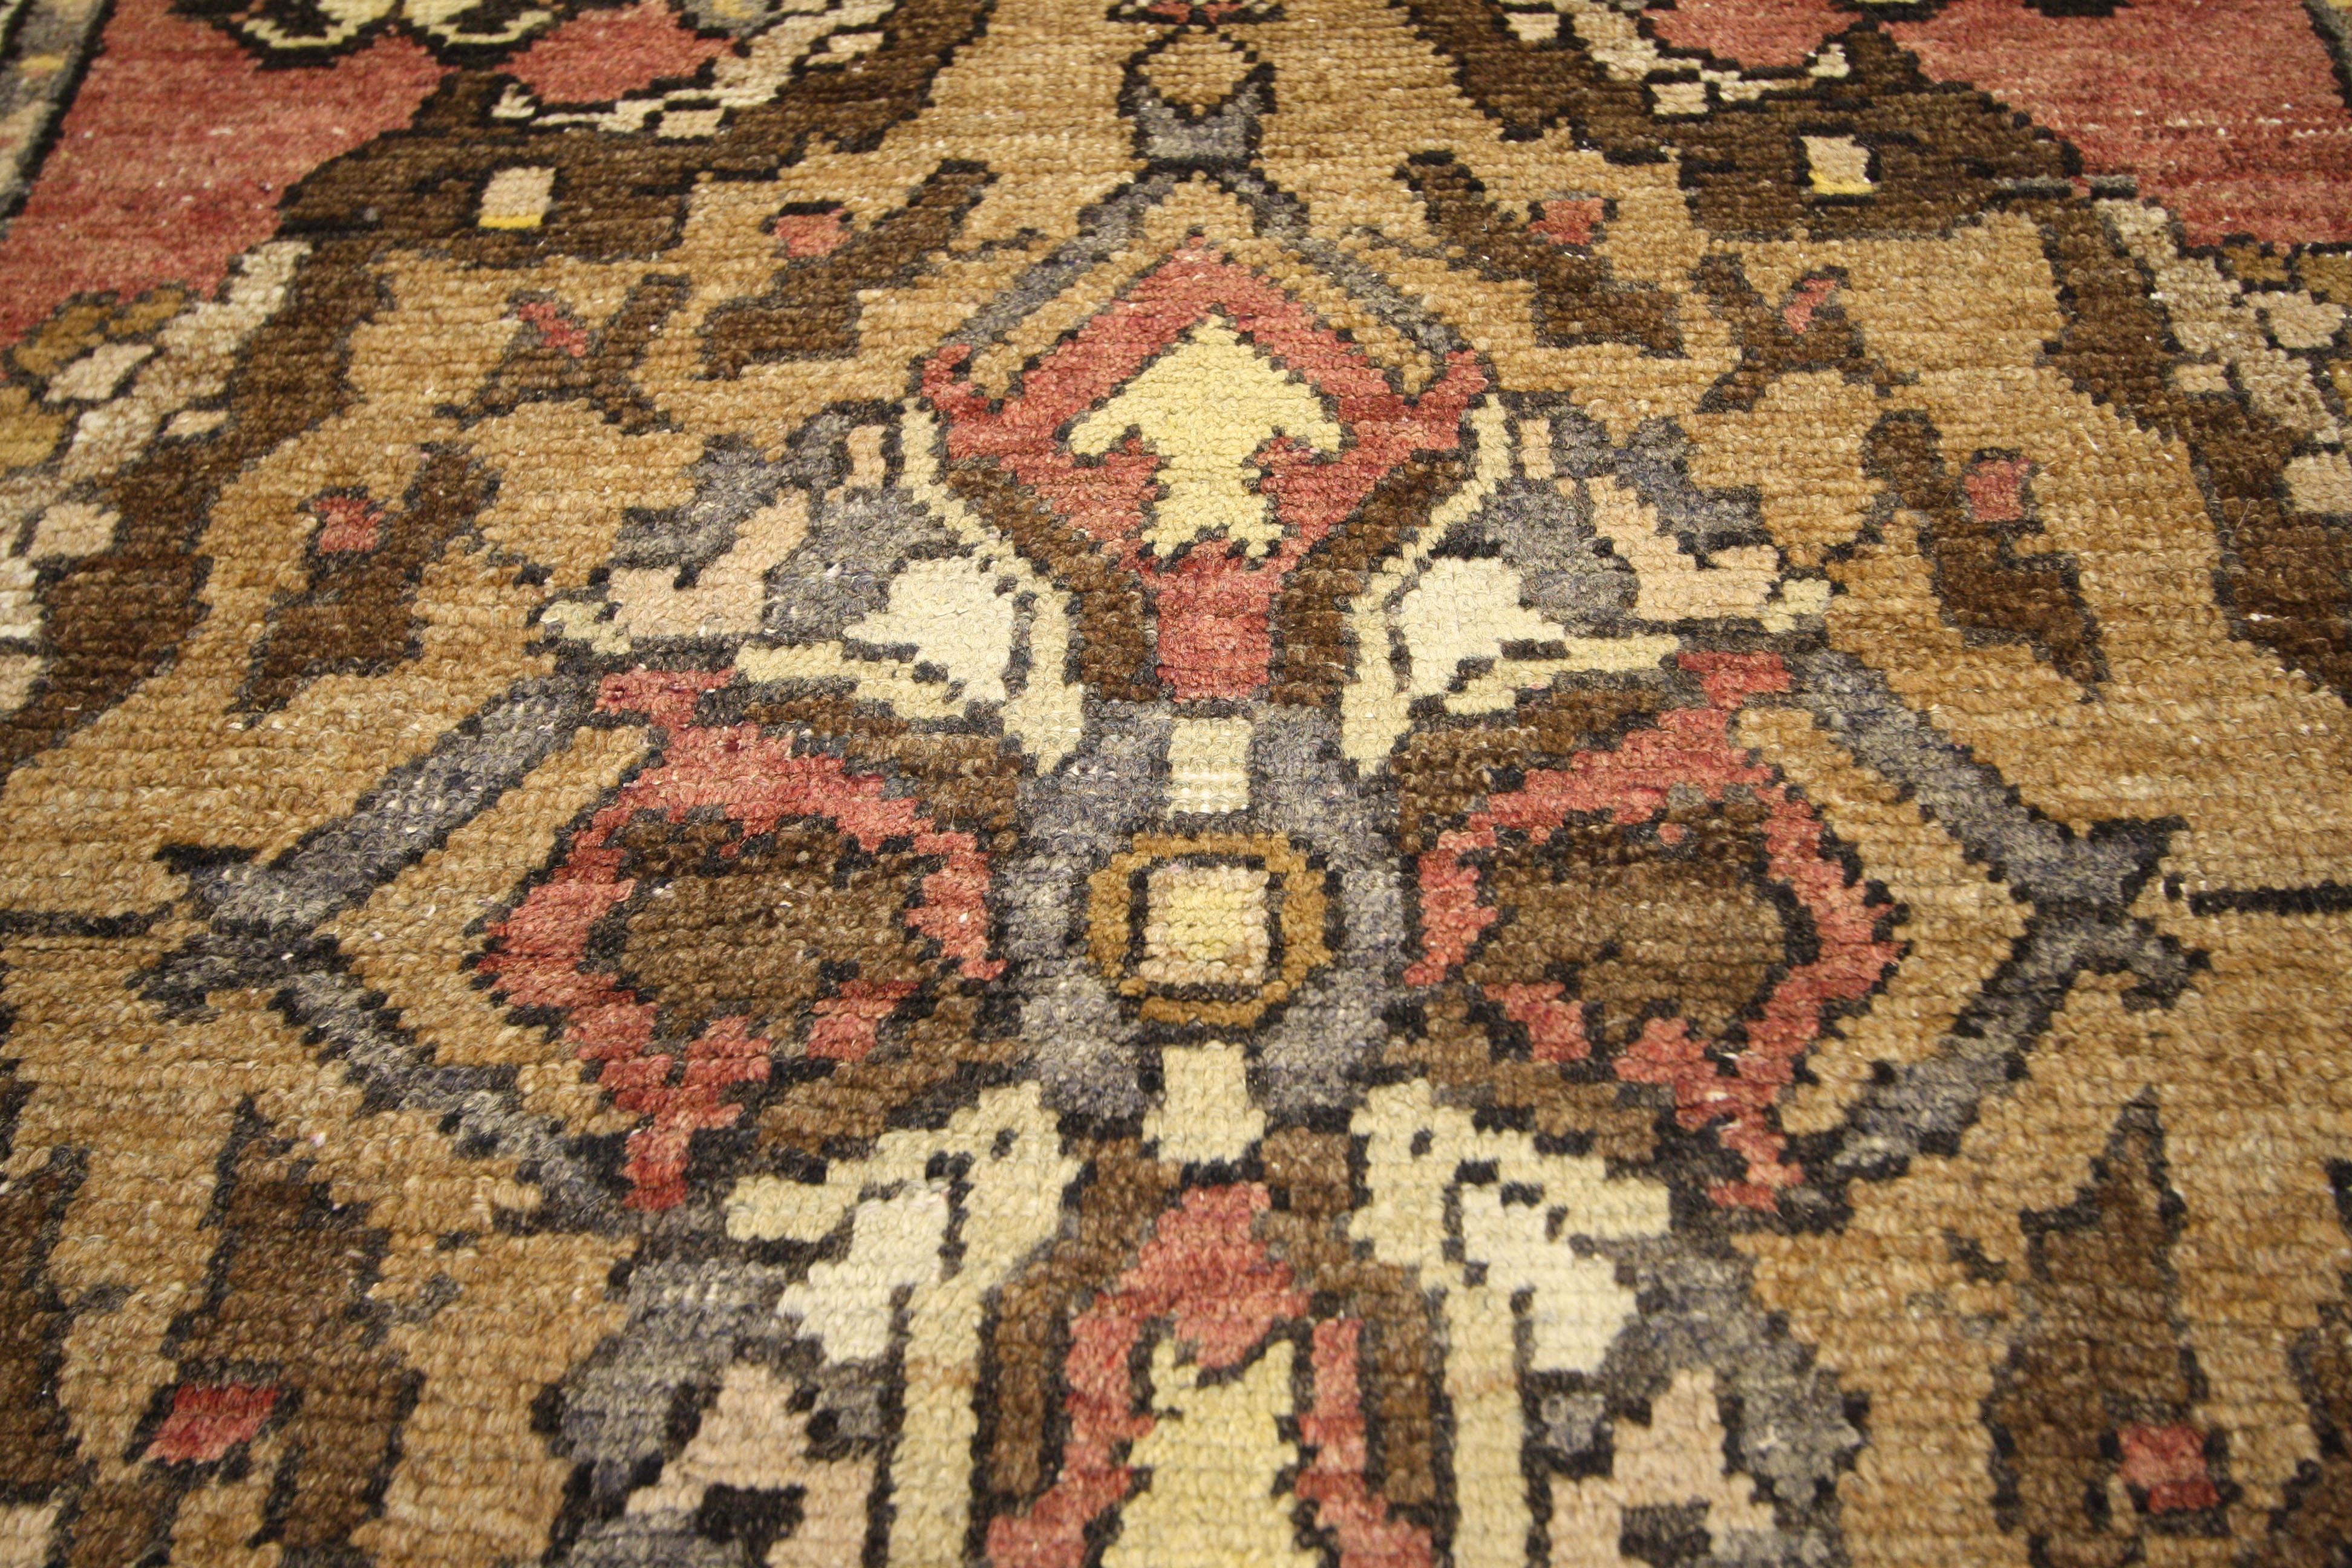 50256, Rustic style vintage Turkish Oushak runner, hallway runner. Sheer elegance and timeless style are on display in this Rustic vintage Turkish Oushak runner. Three grand medallions anchor the field while smaller abstract medallions add further